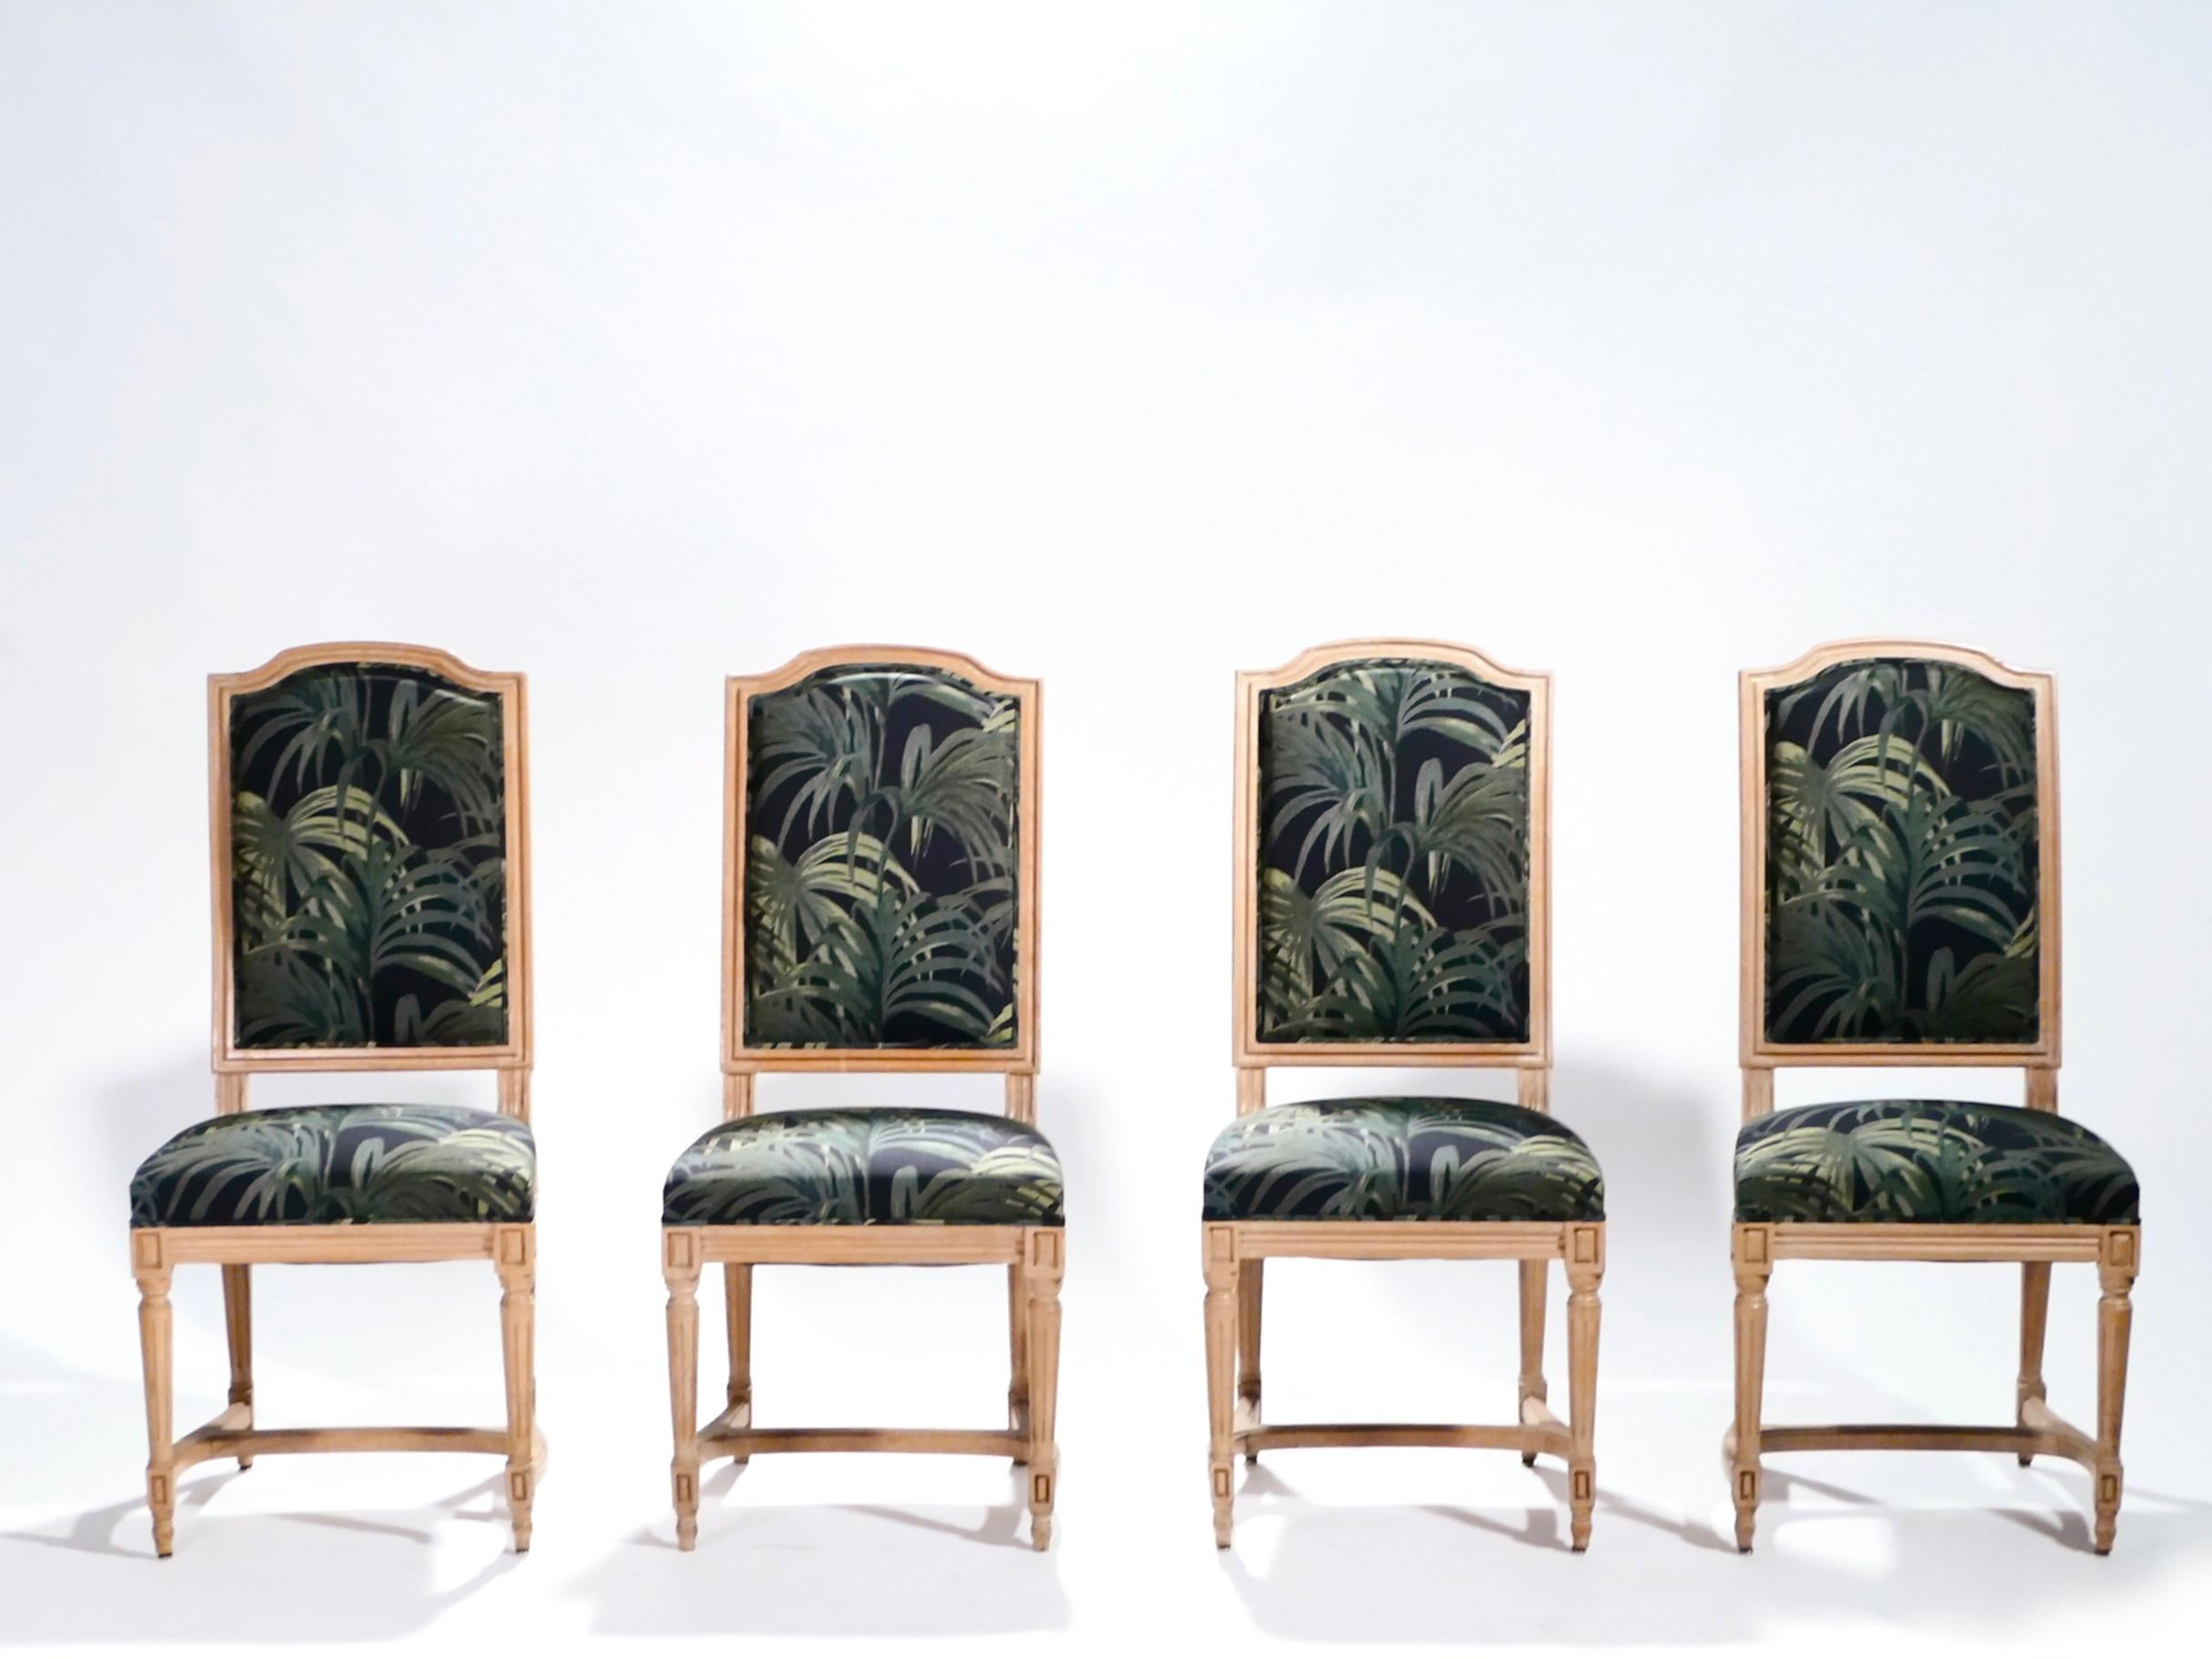 New colorful upholstery is a great contrast to the beautiful old oak in these chairs. The lovely patina evident on the oak feet and structure is enough to convey the half-century of history in this set, so the upholstery, in a fresh palm pattern by